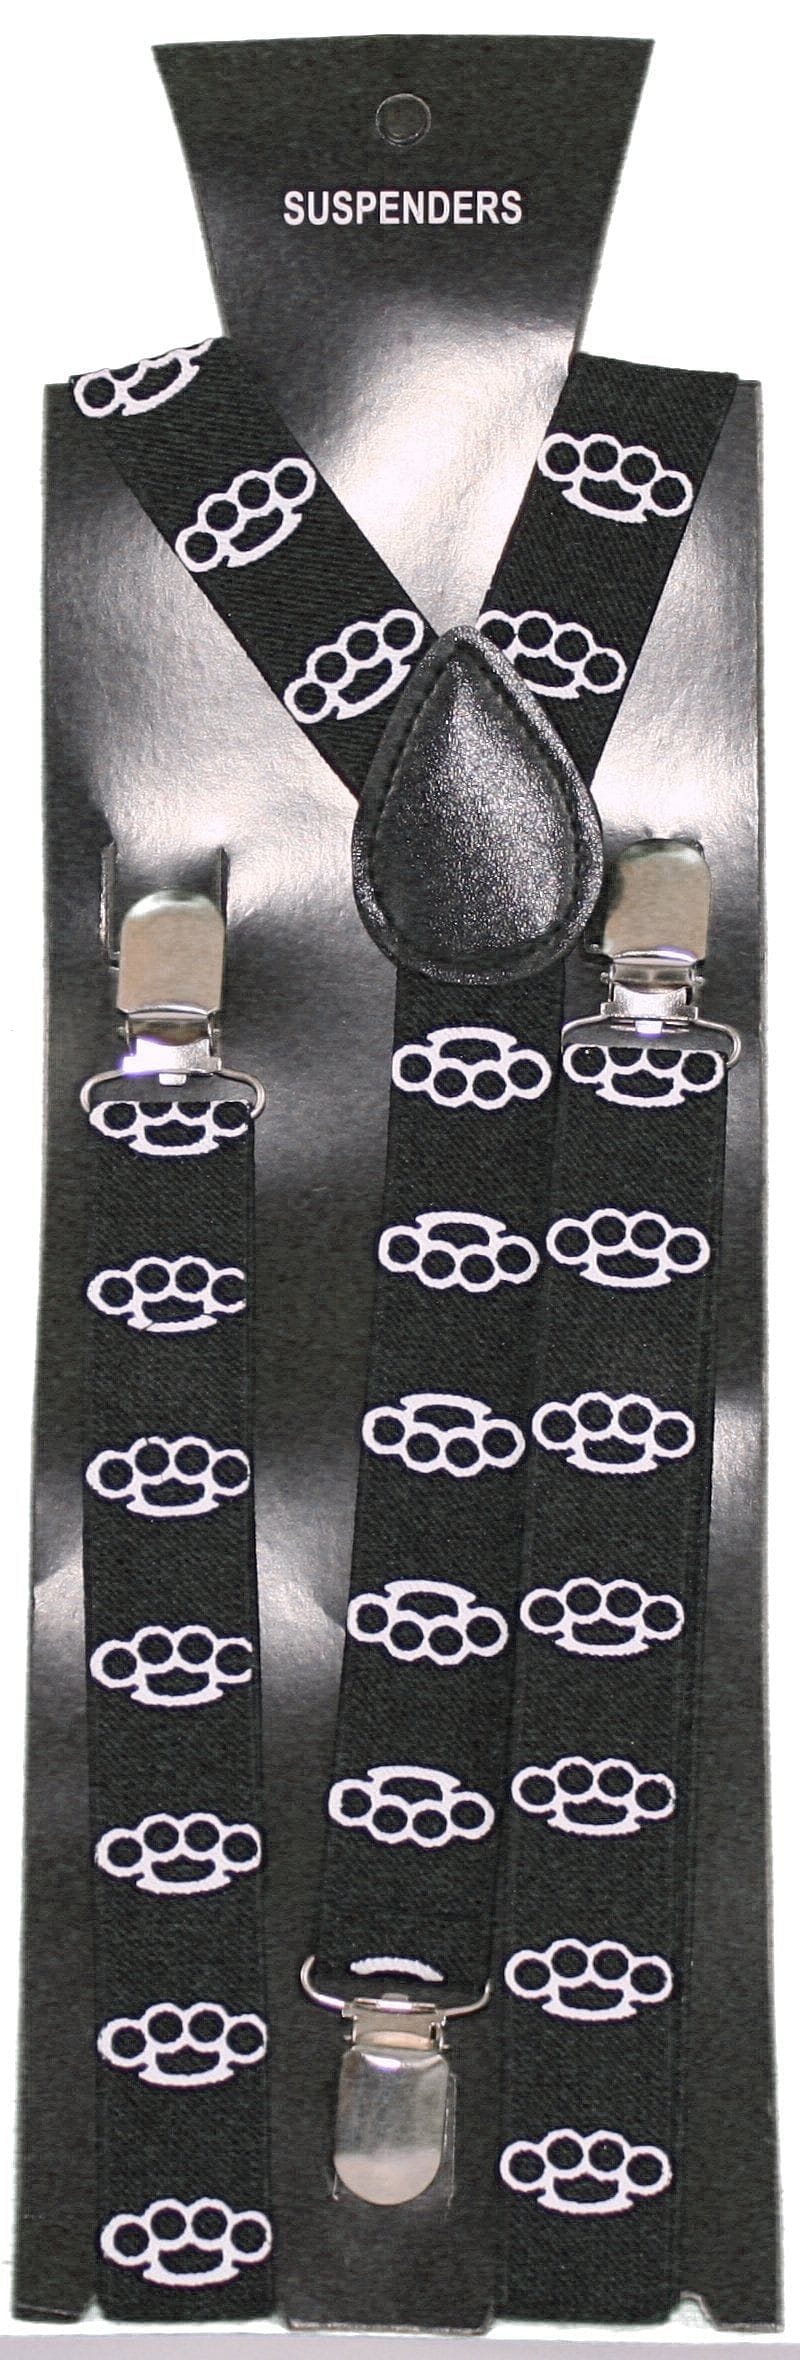 Suspenders Pawprint - Shelburne Country Store